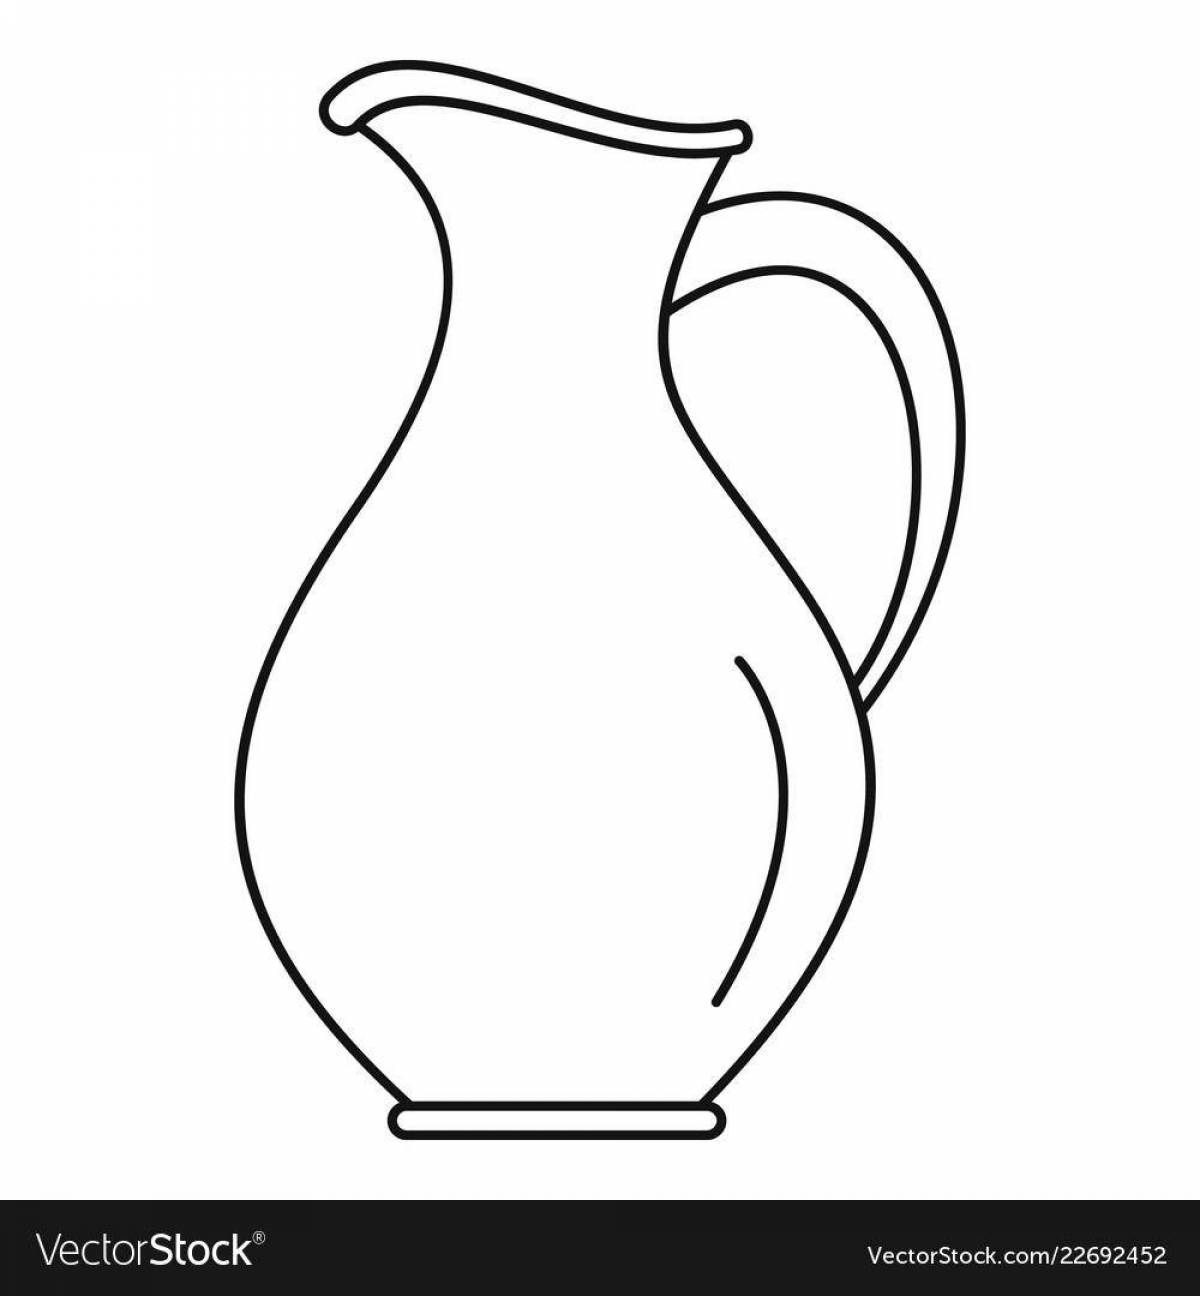 Playful jug coloring page for toddlers